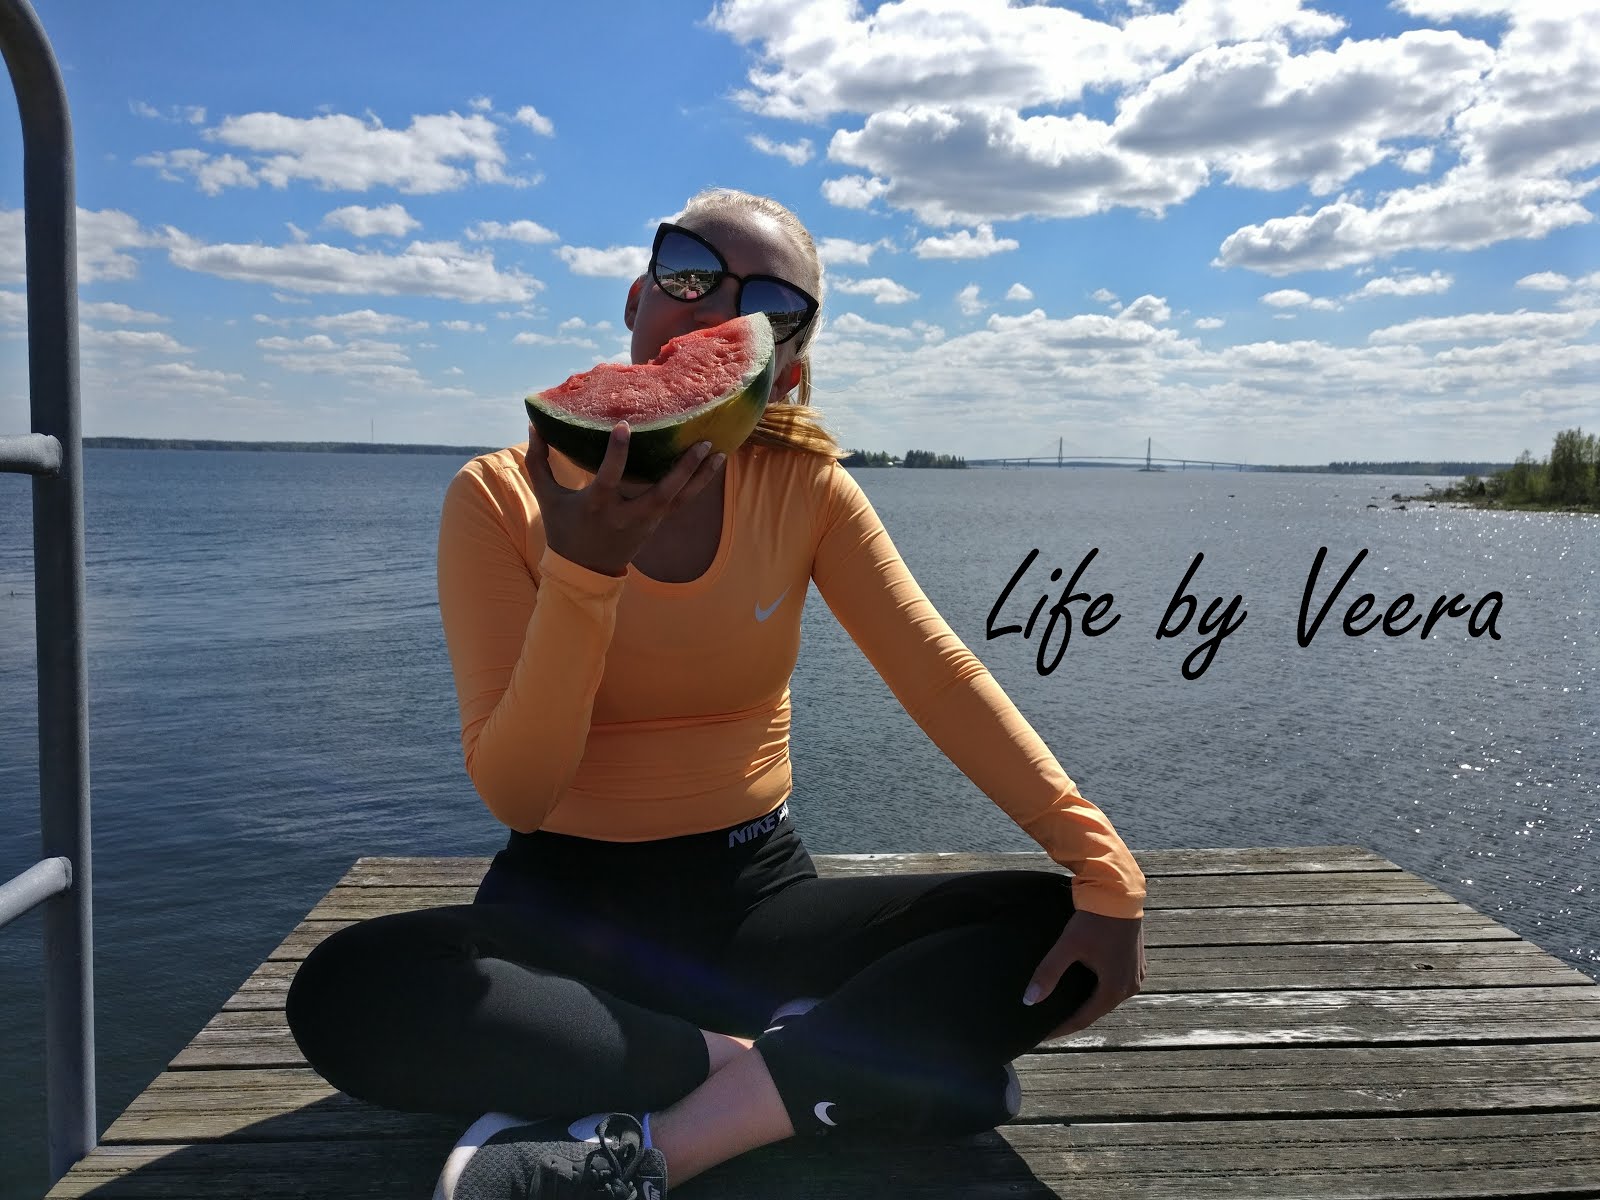 Life by Veera